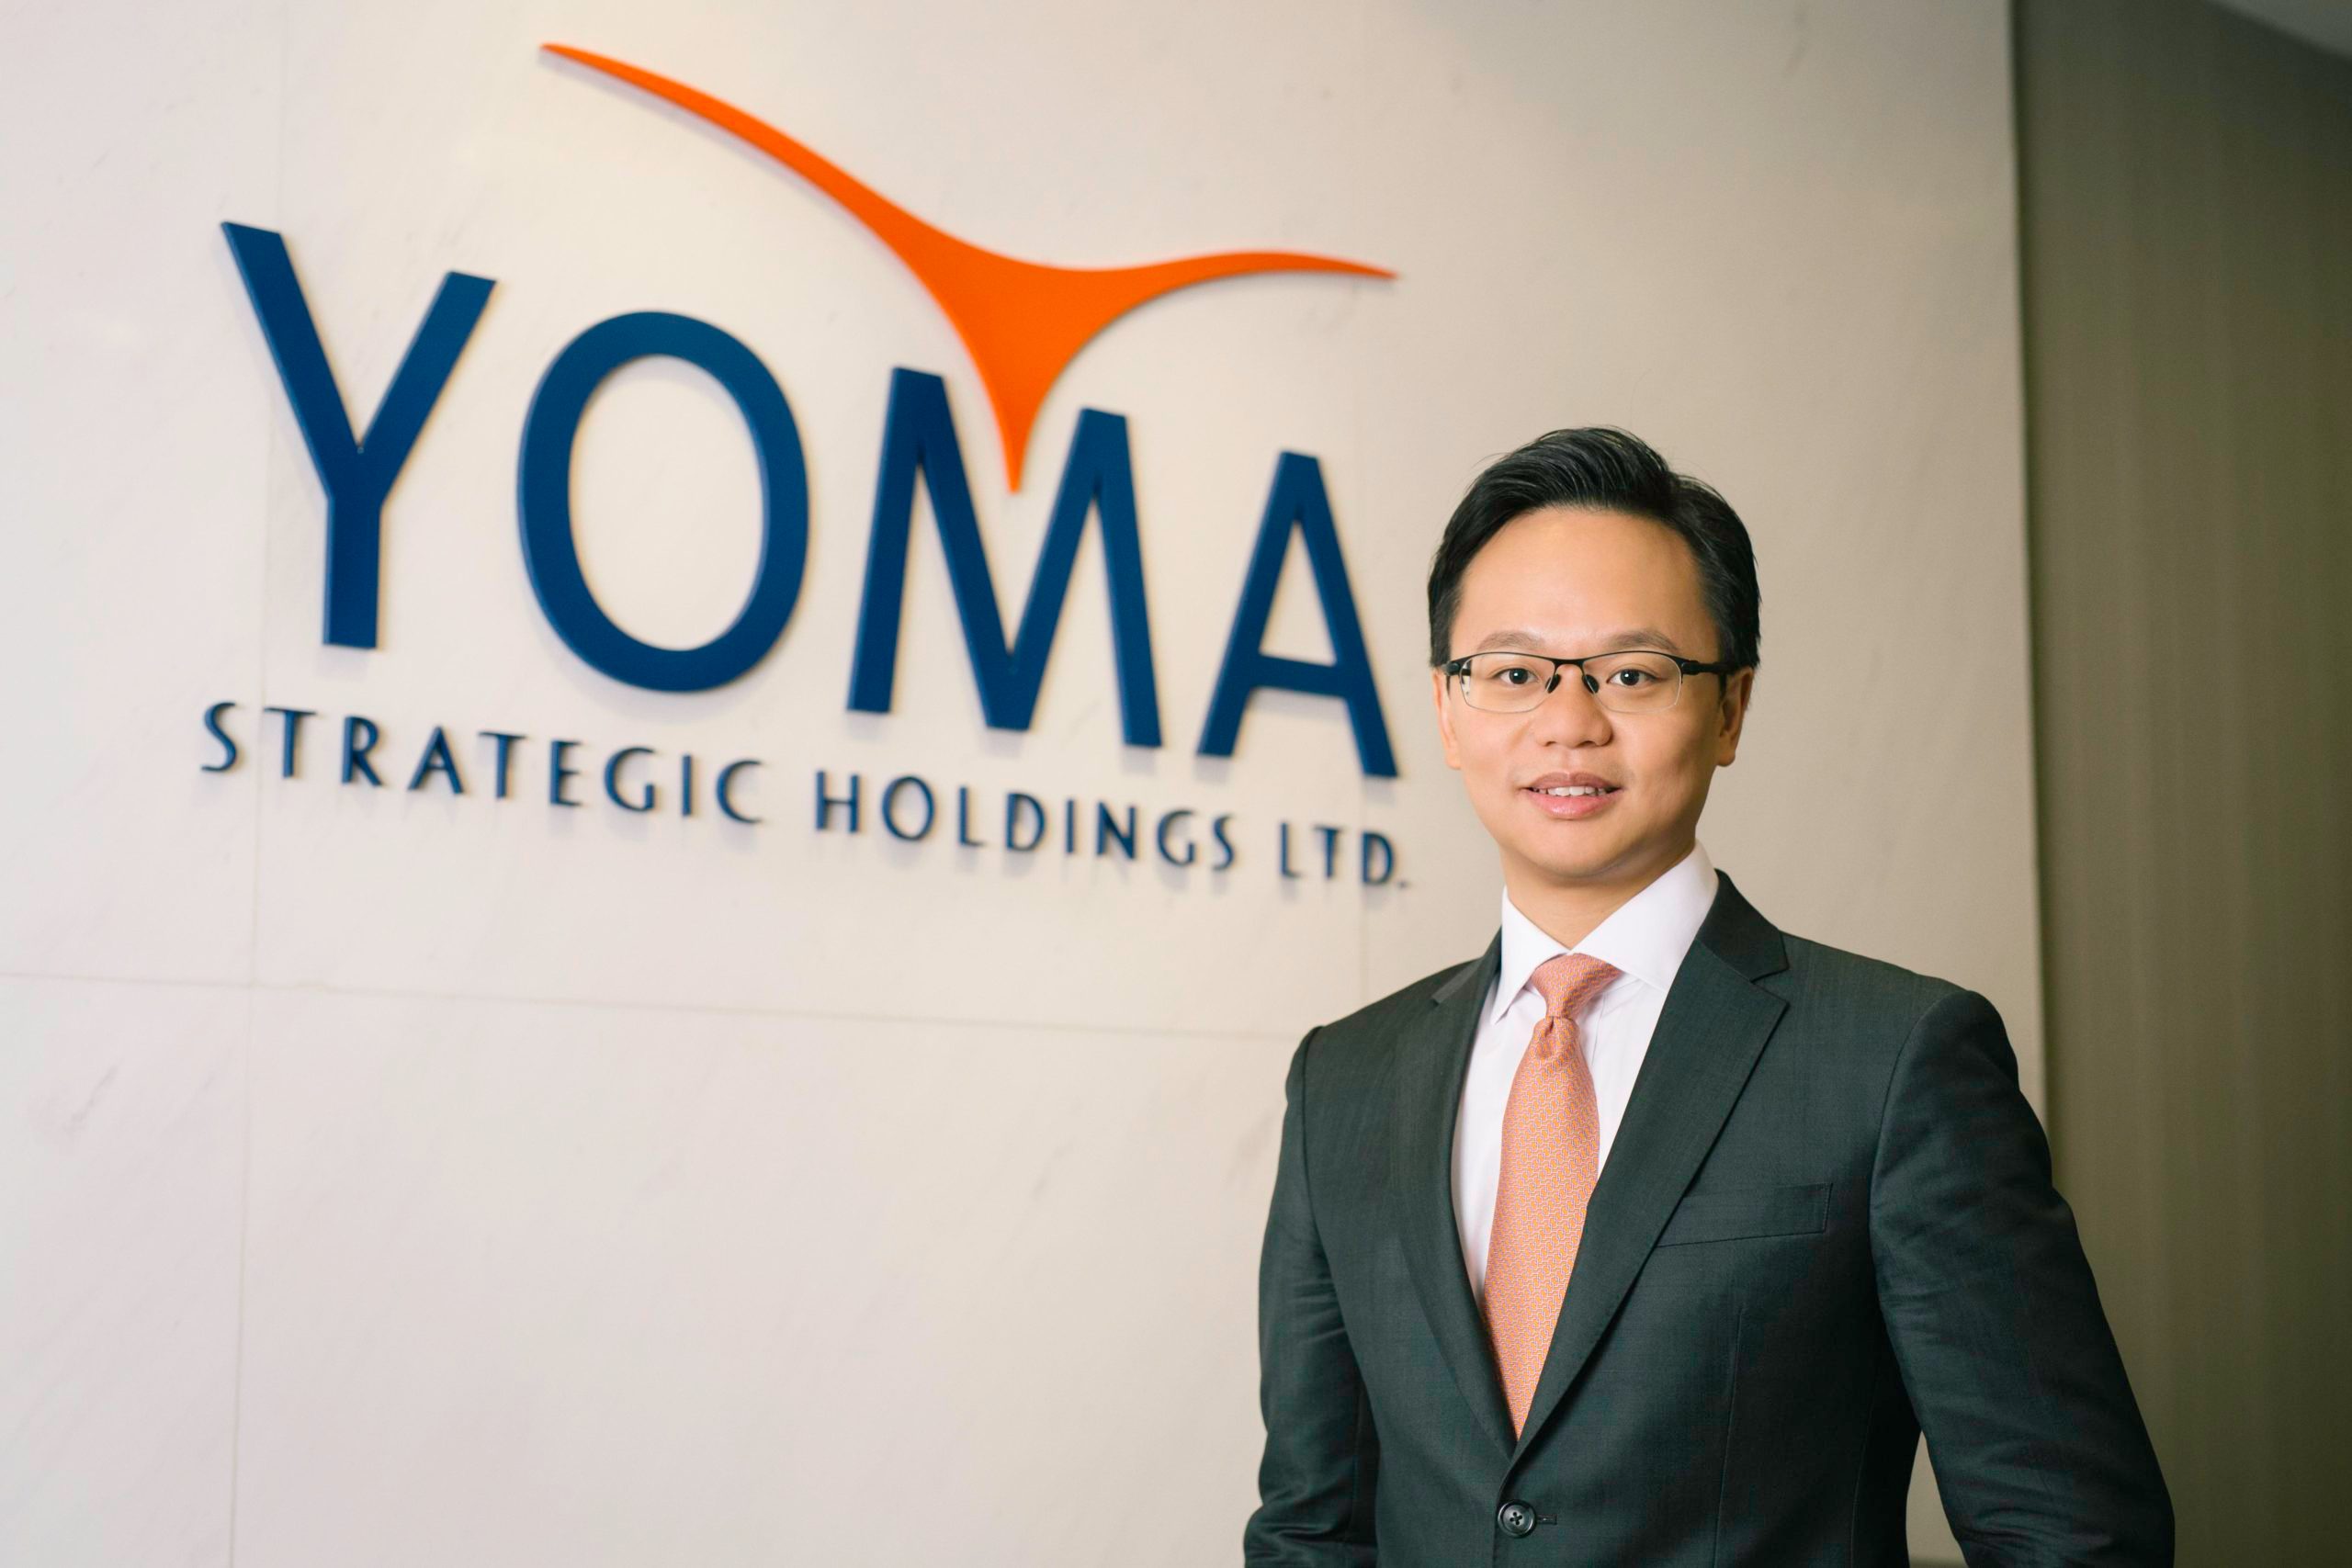 Wave Money could be Myanmar's first tech unicorn, says Yoma Strategic CEO Pun